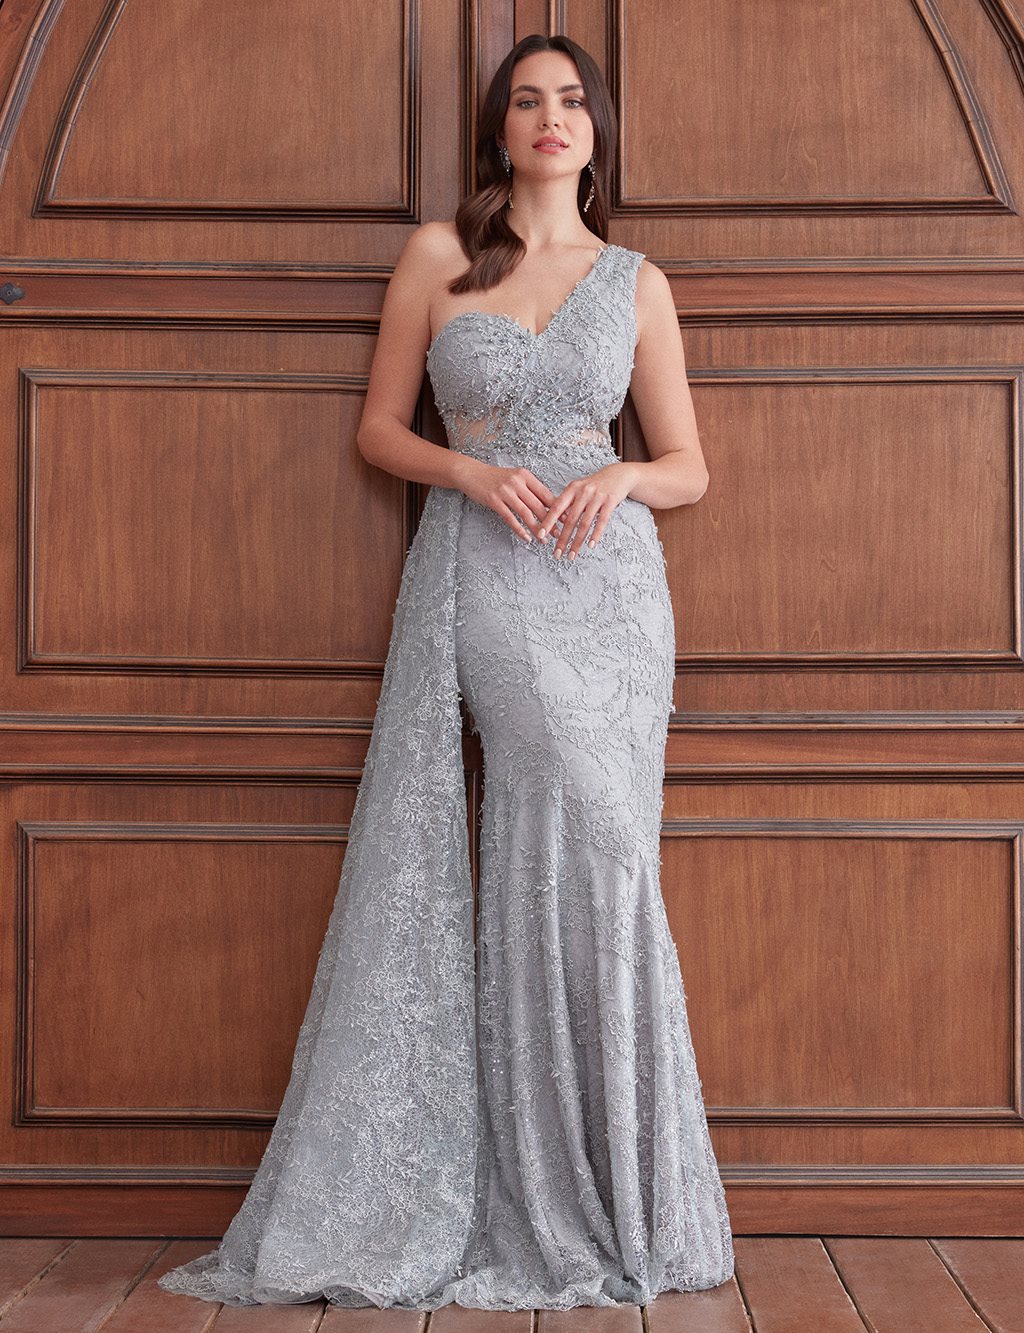 TIARA One Shoulder Dress With Cape Grey